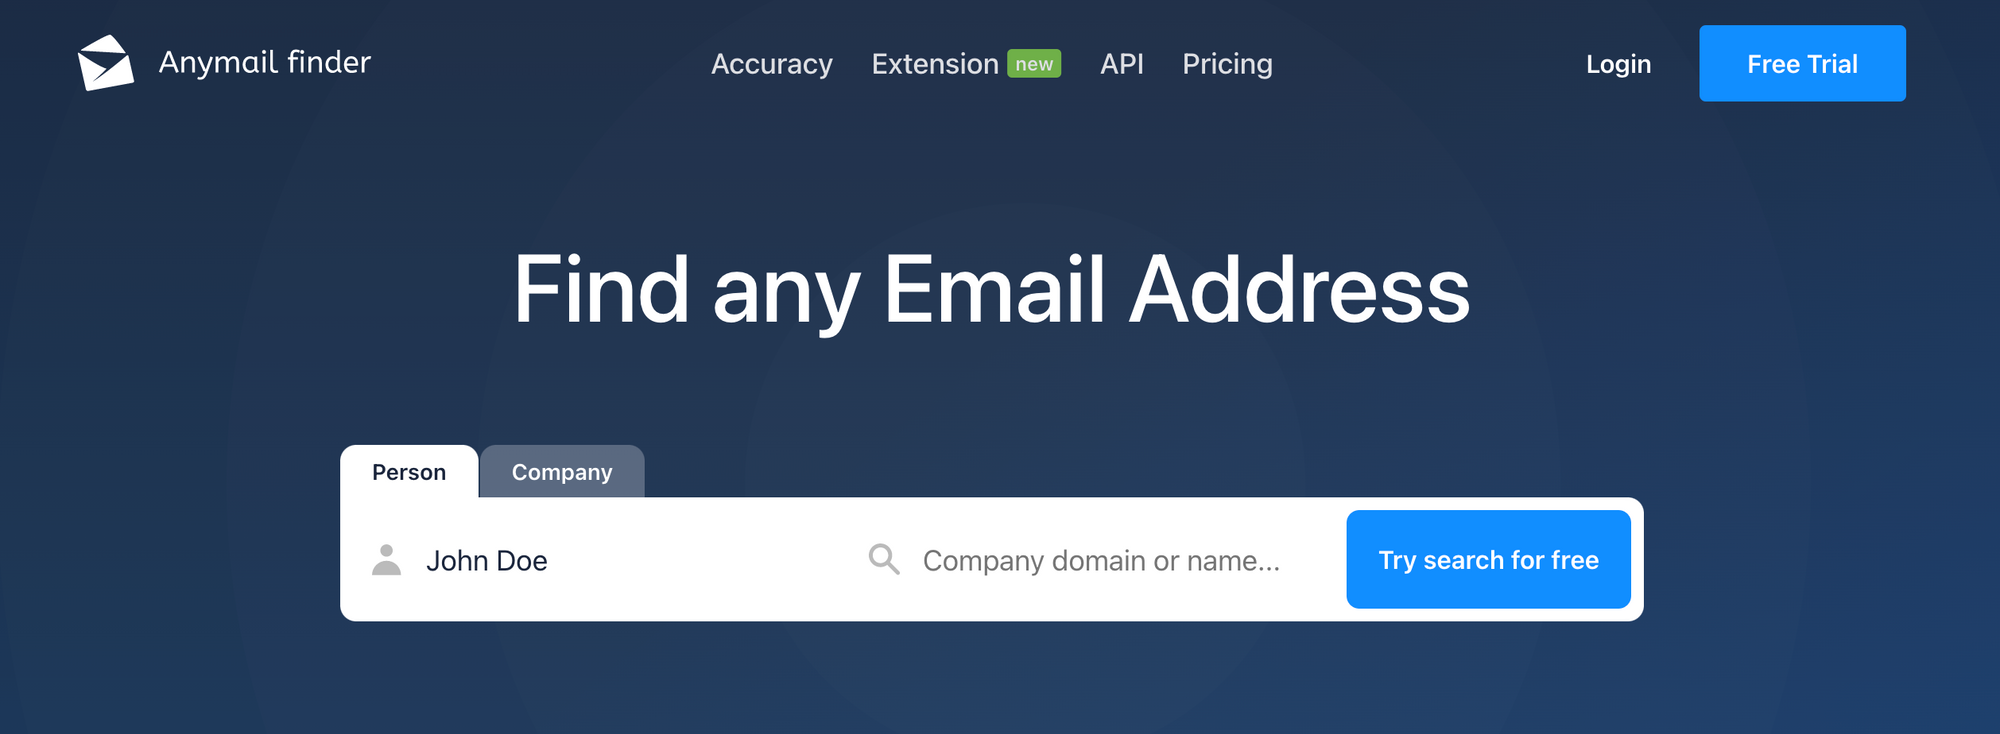 AnyMail Finder main page